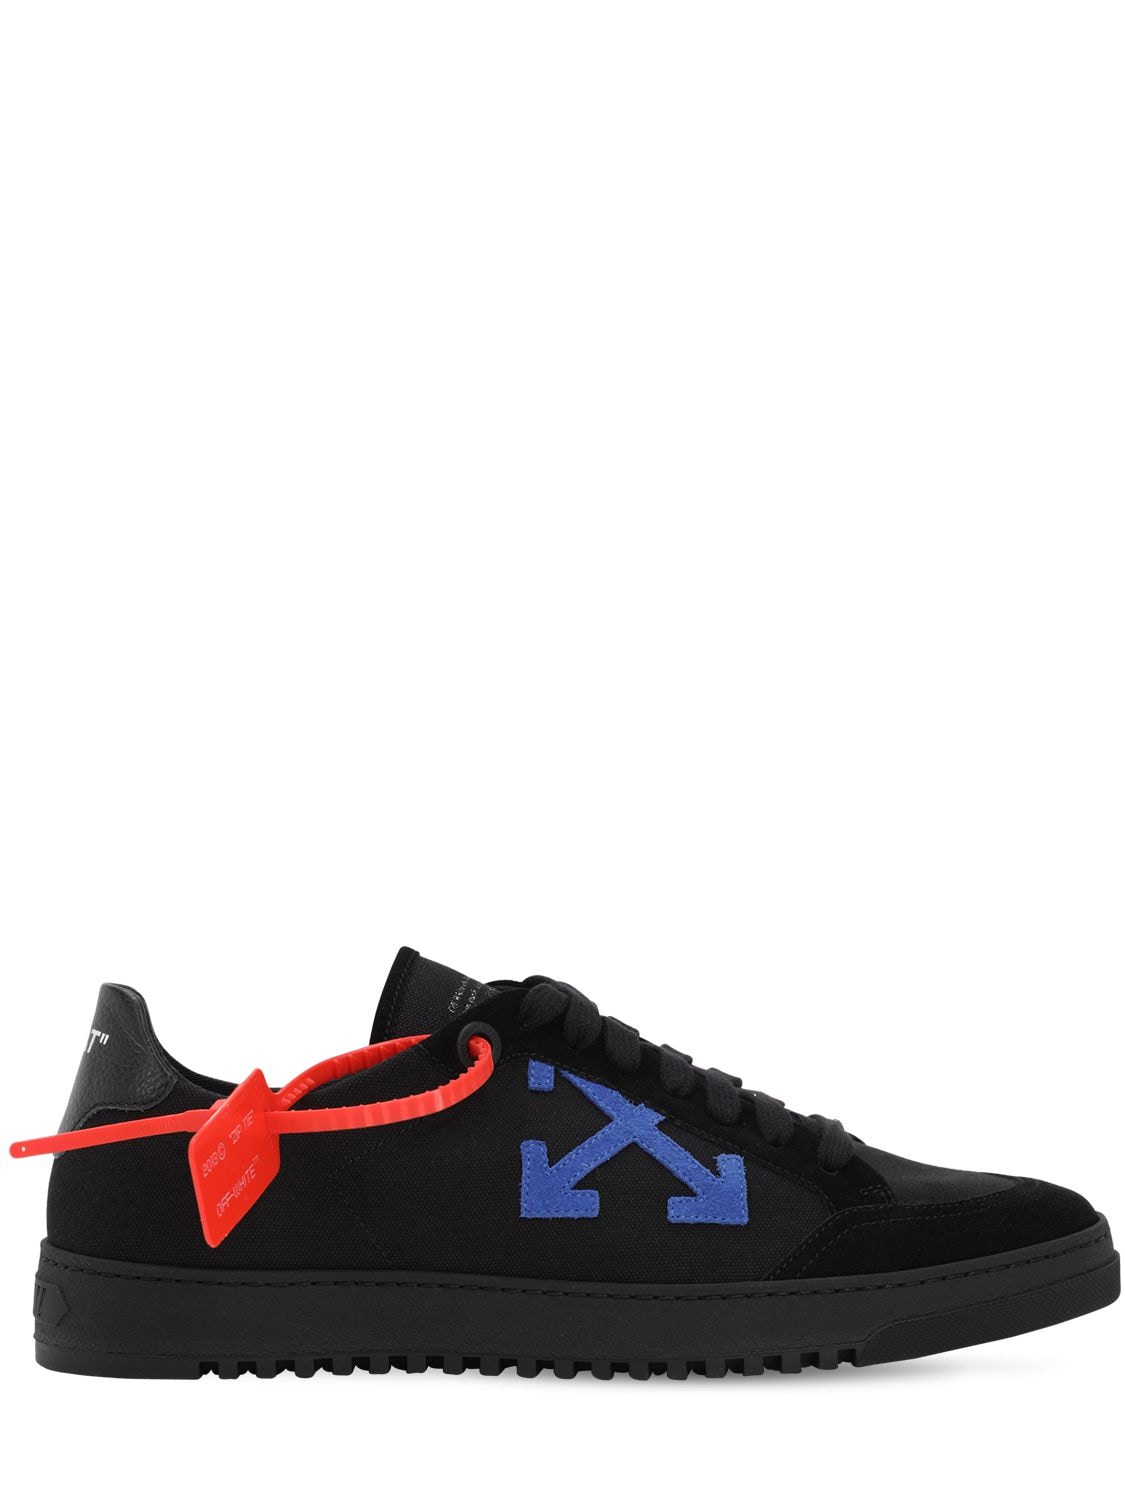 OFF-WHITE 2.0 LEATHER & SUEDE trainers,70IJSY011-MTAXMA2